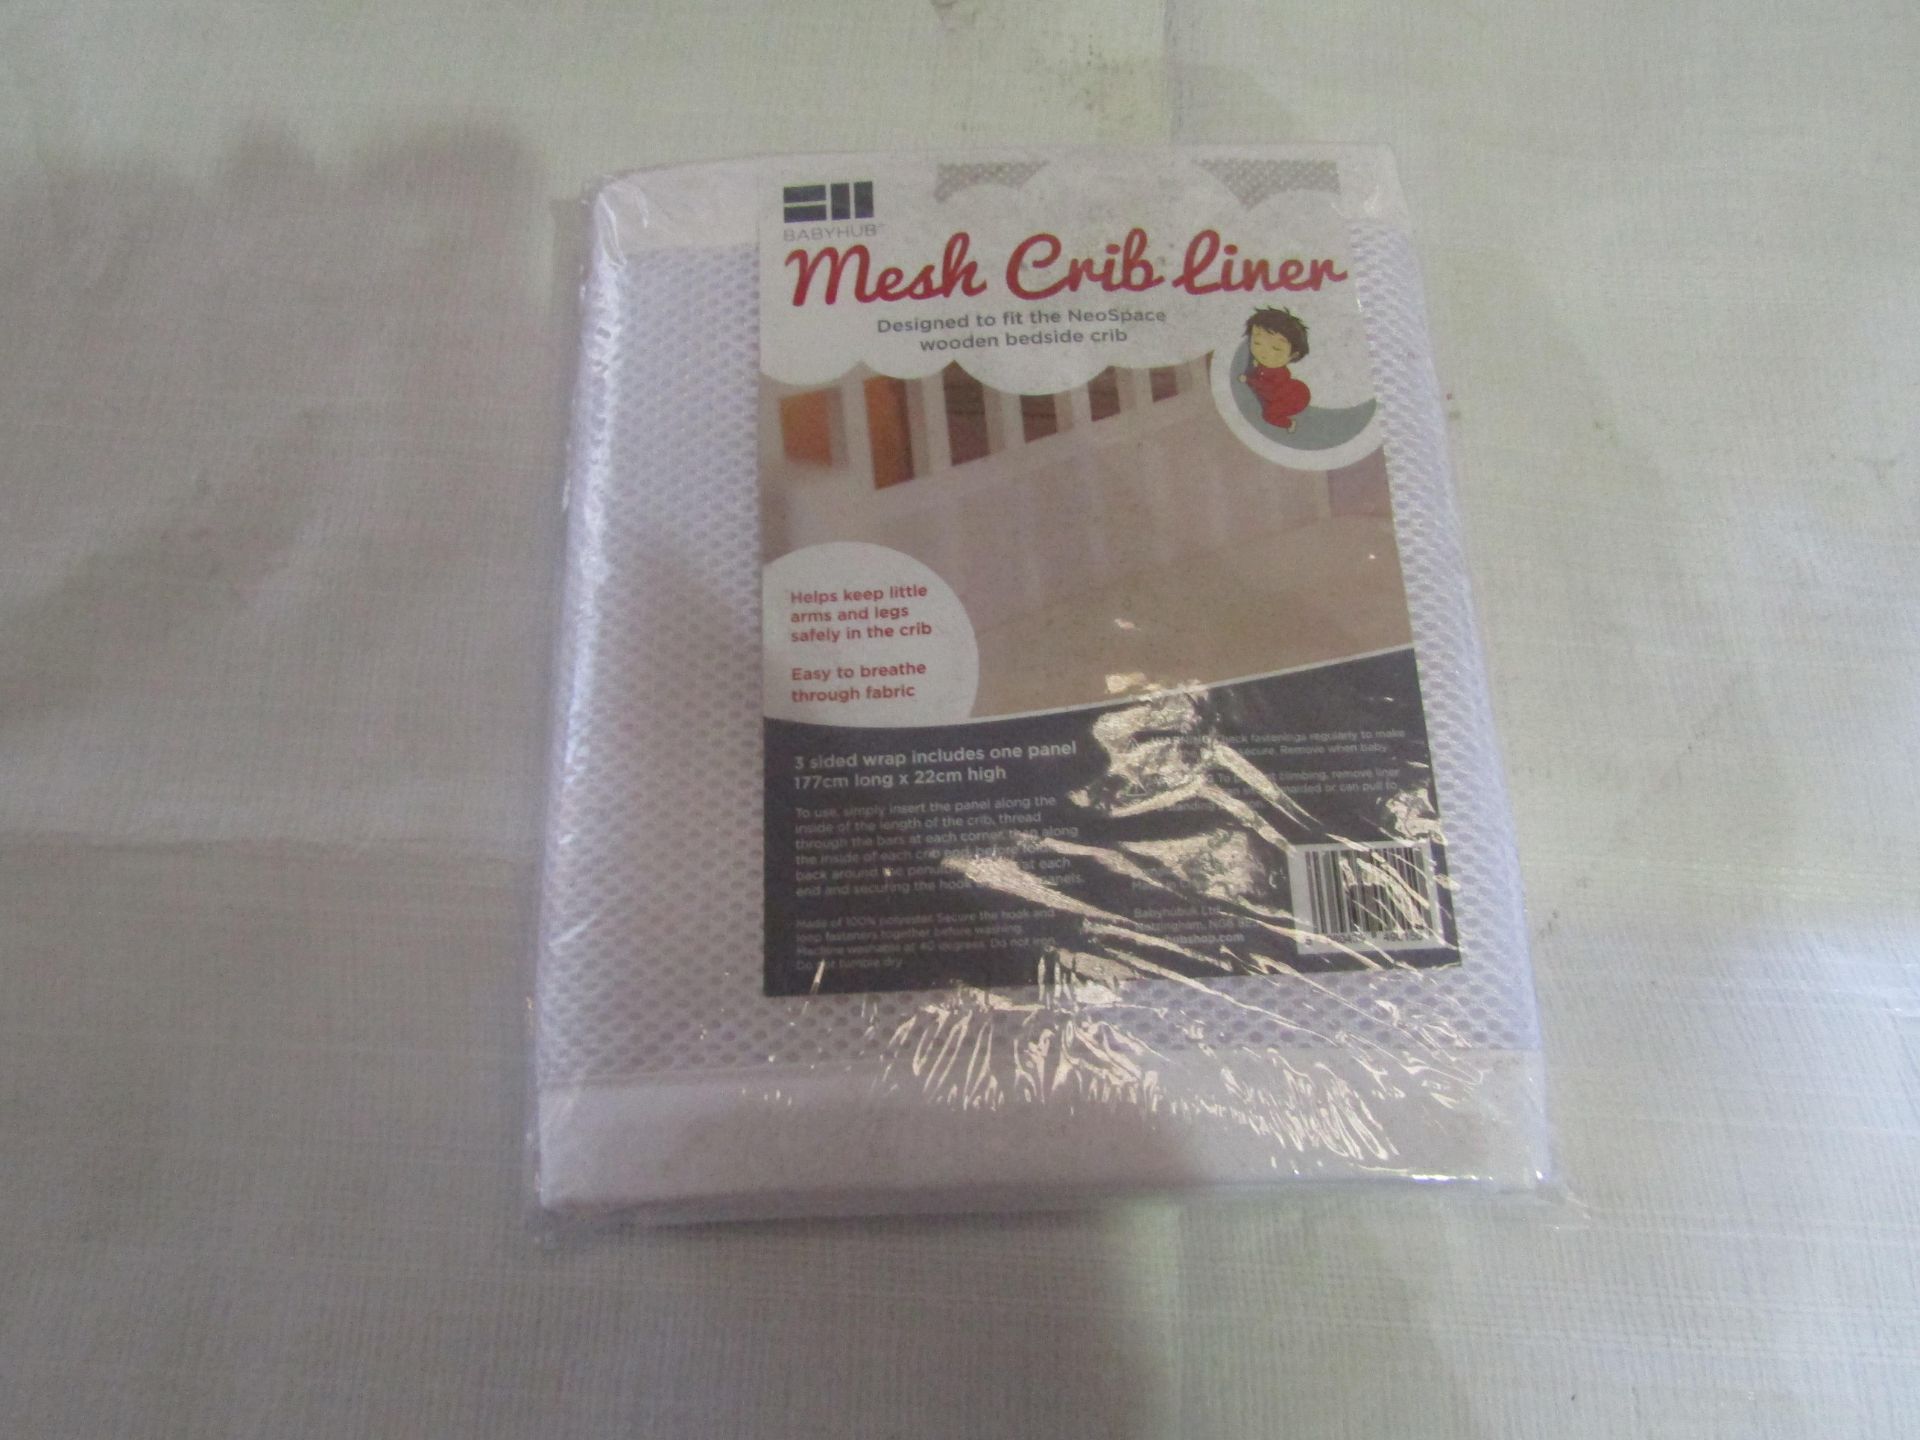 4x Baby Hub Mesh Crib Liner, 3 Sided Wrap Includes One Panel 177cm Long 22cm High - New & Packaged.